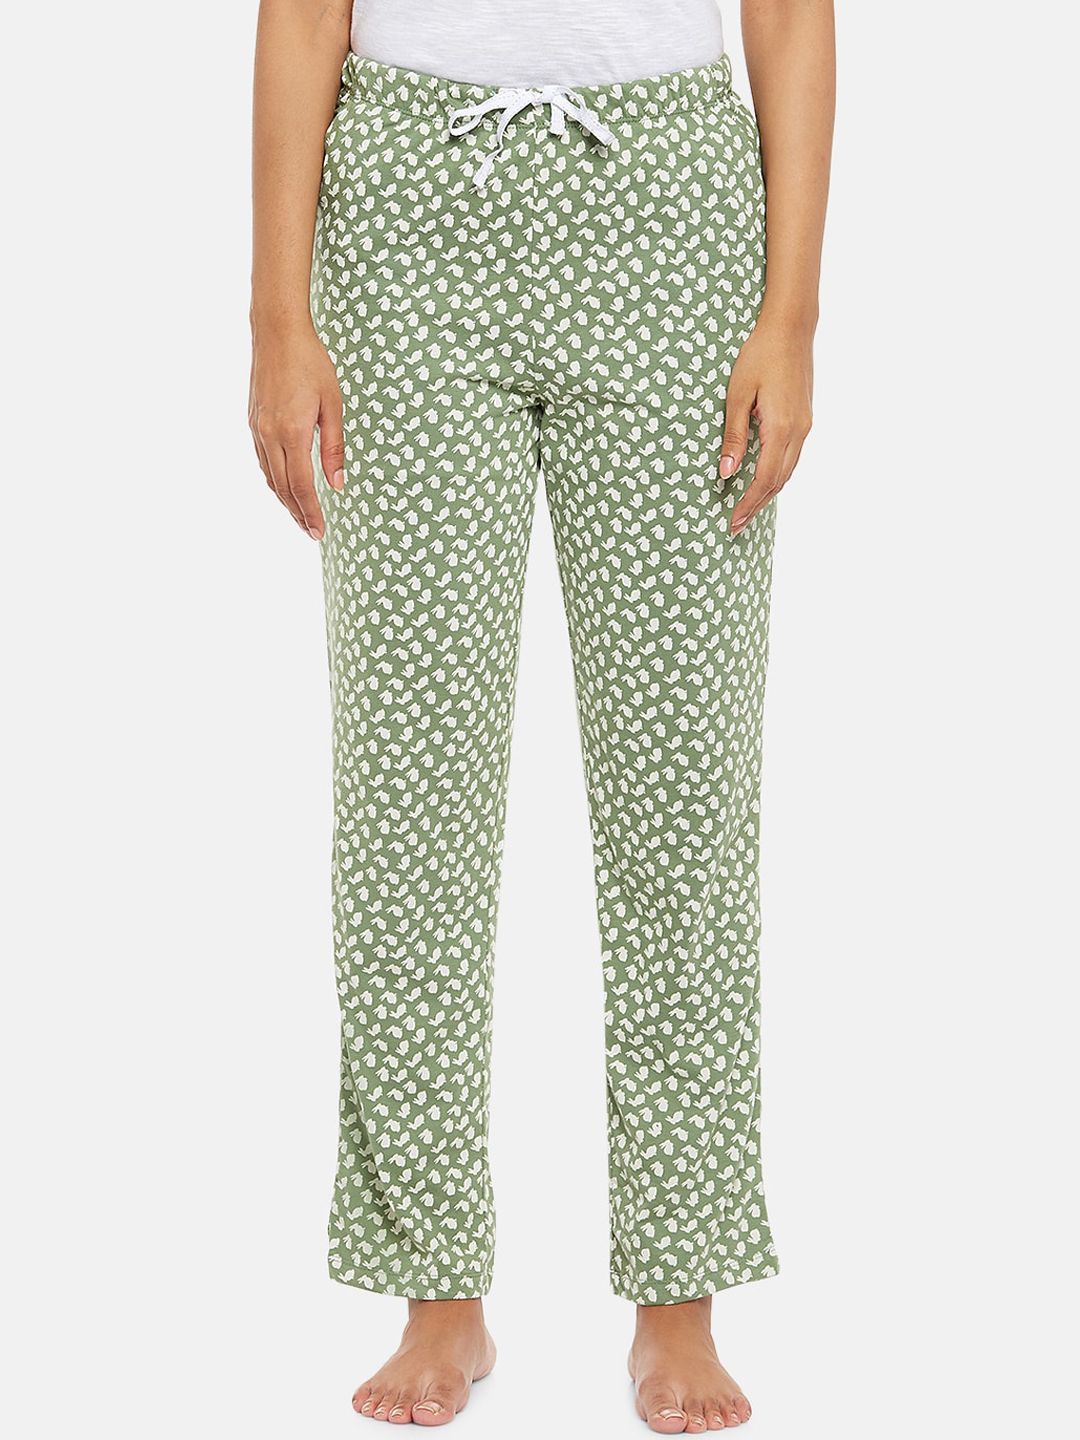 Dreamz by Pantaloons Women Green Printed Lounge Pant Price in India